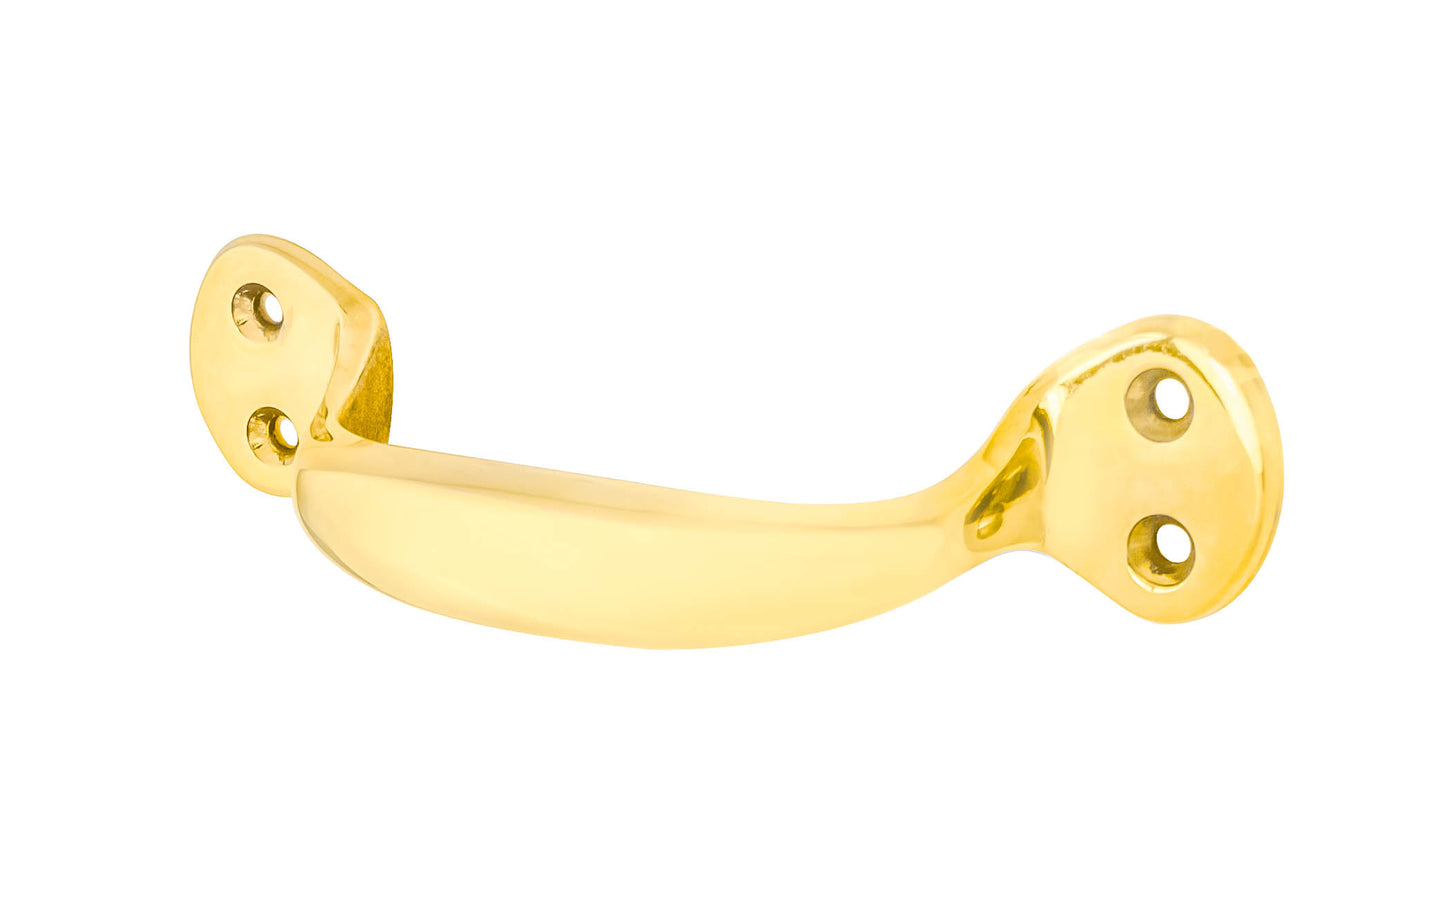 Heavy Duty Solid Brass Handle ~ 4-3/4" On Centers ~ Non-Lacquered Brass (will patina naturally over time)